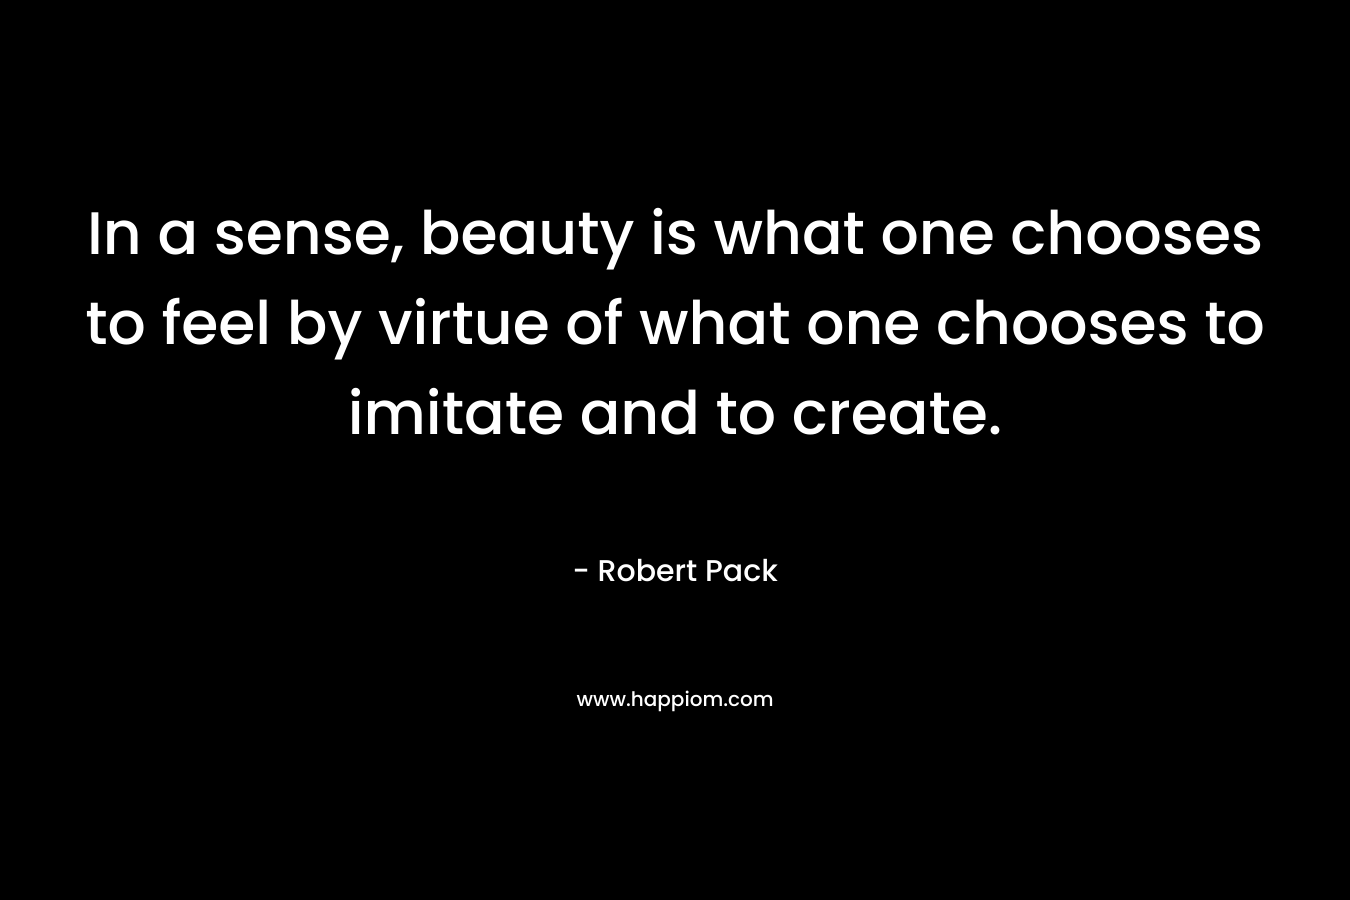 In a sense, beauty is what one chooses to feel by virtue of what one chooses to imitate and to create. – Robert Pack